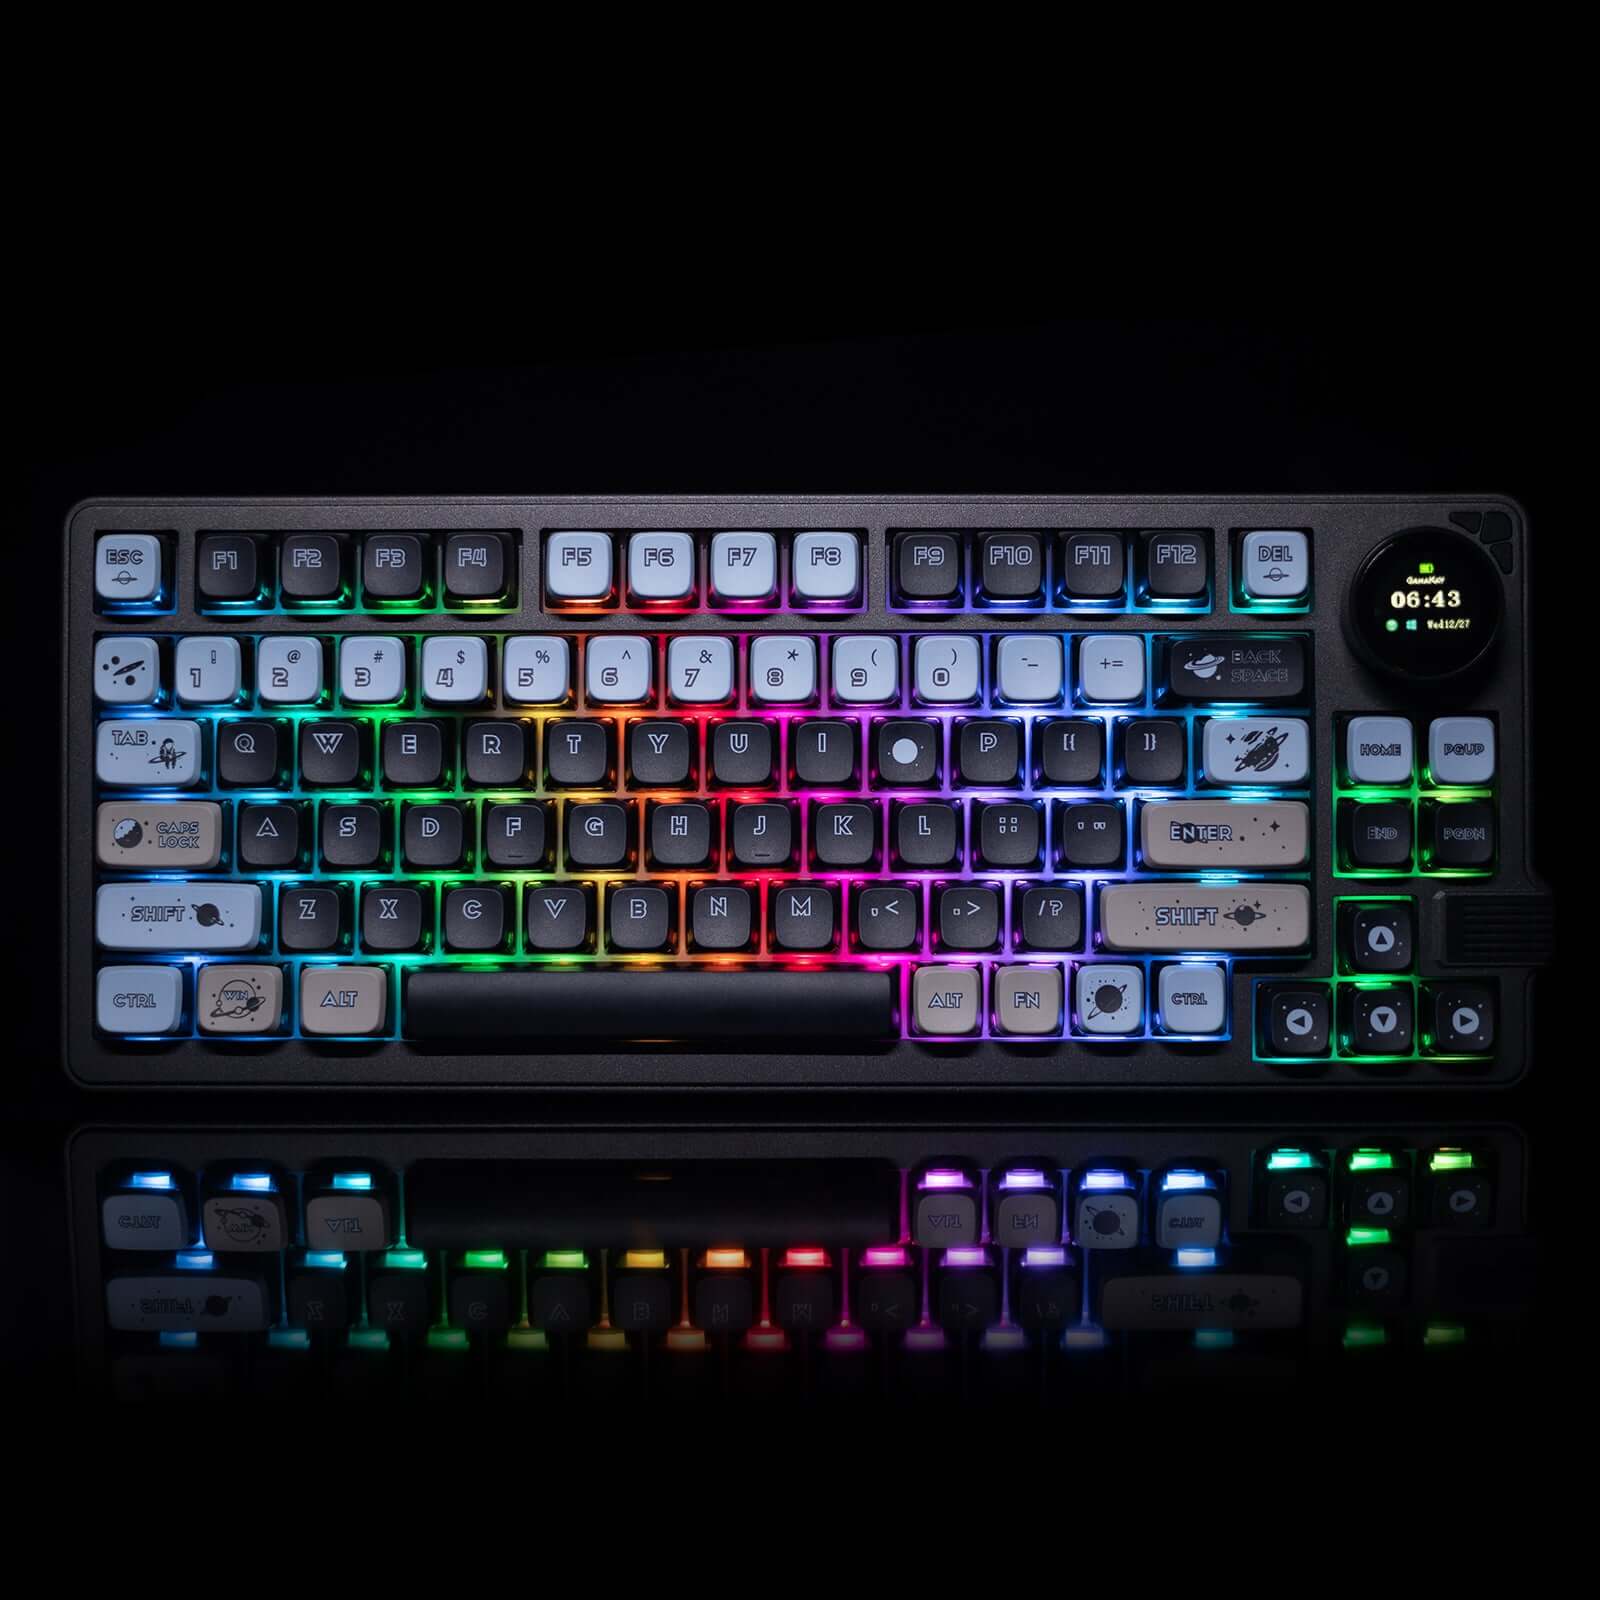 Gamakay LK75 75% Mechanical Keyboard with TFT Smart Display & Knob: A sleek and compact mechanical keyboard designed for productivity and style. Features a vibrant TFT Smart Display for customizable information at your fingertips. The tactile knob allows 